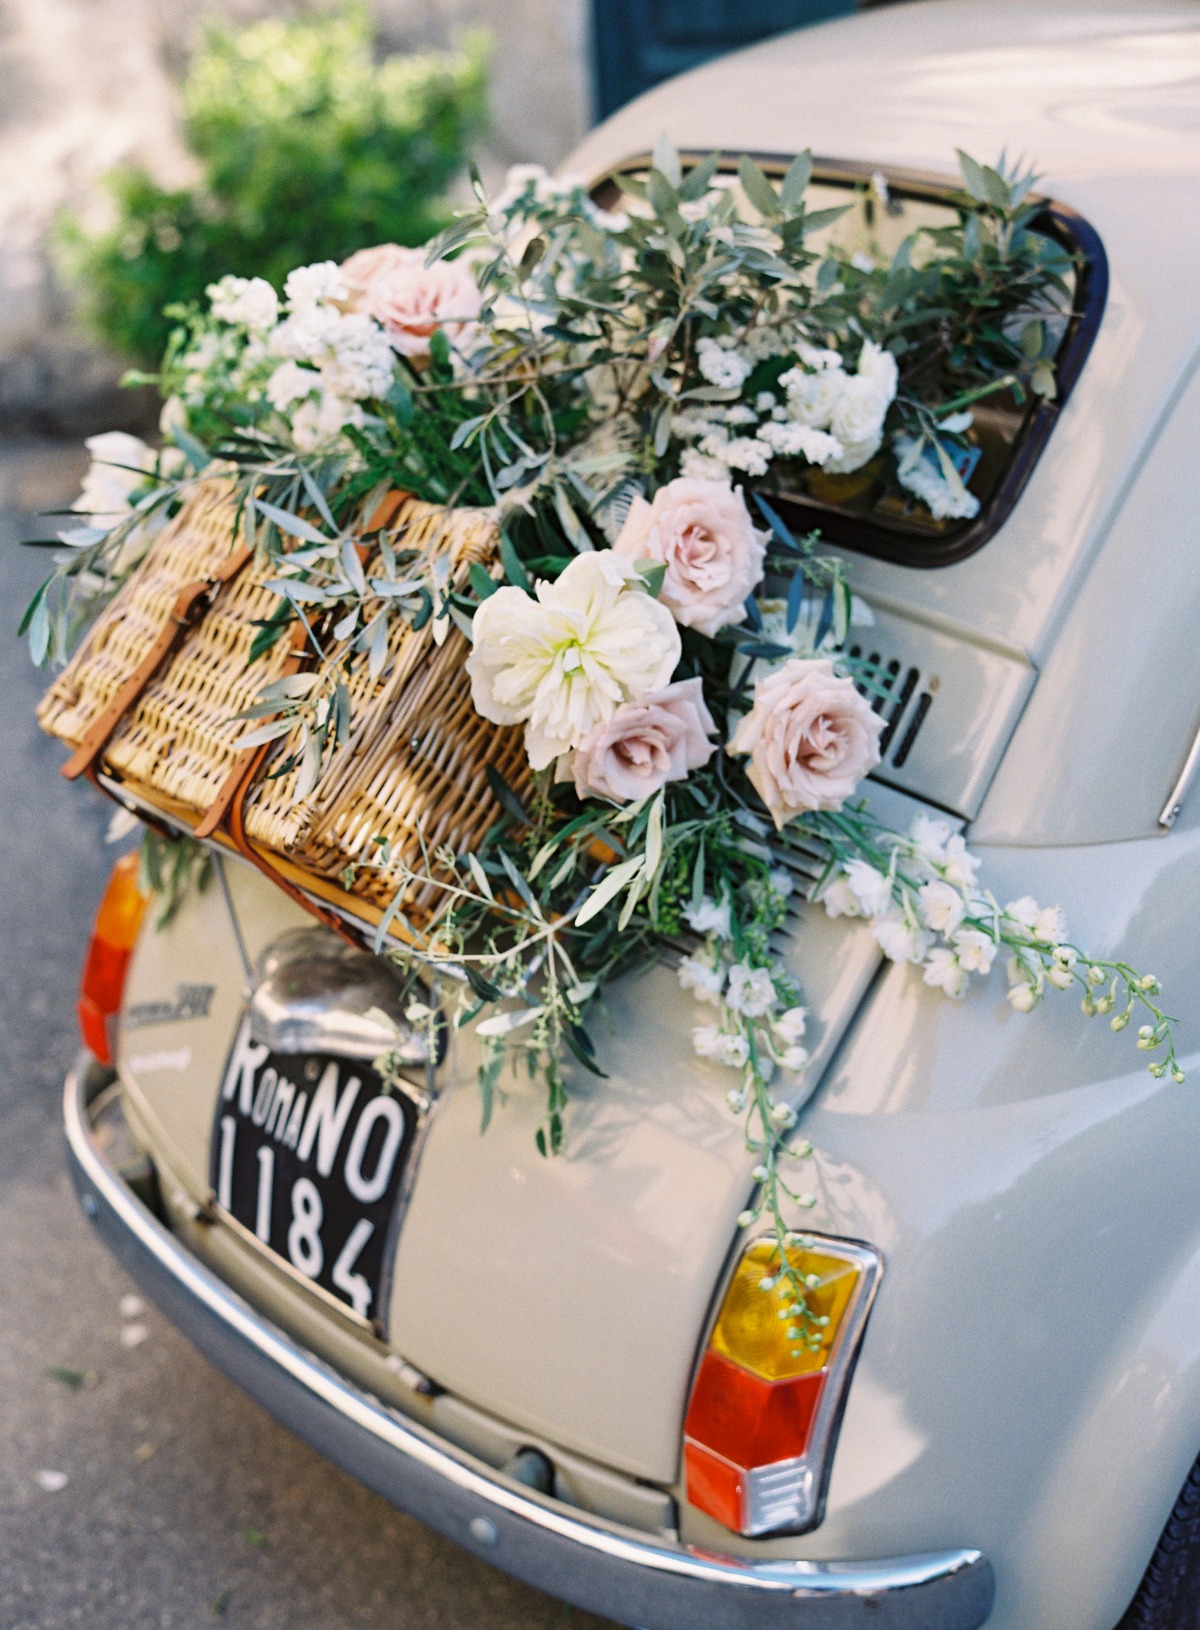 Flower covered vintage Fiat rental in Tuscany region of Italy